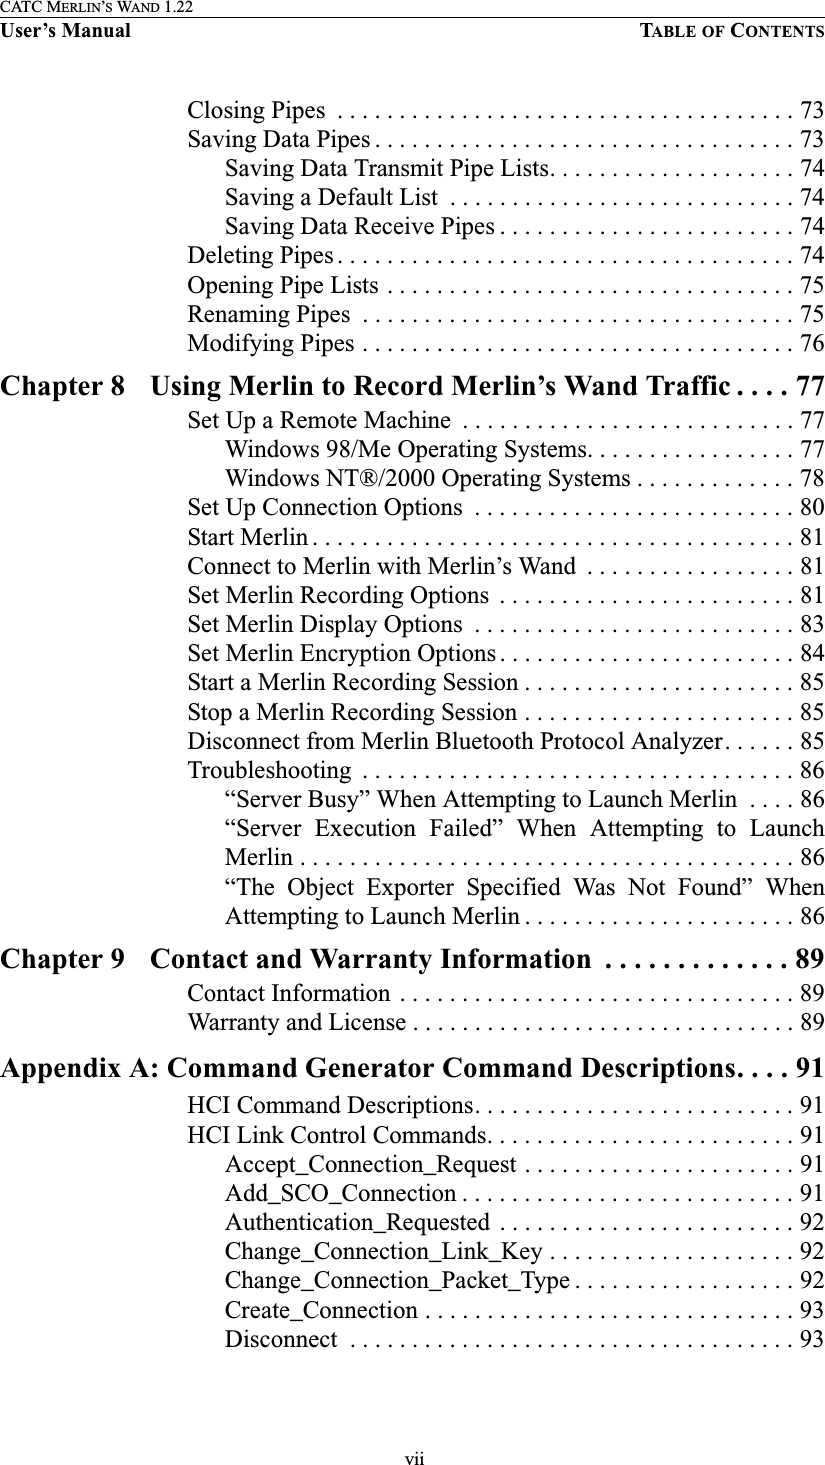  viiCATC MERLIN’S WAND 1.22User’s Manual TABLE OF CONTENTSClosing Pipes  . . . . . . . . . . . . . . . . . . . . . . . . . . . . . . . . . . . . . 73Saving Data Pipes . . . . . . . . . . . . . . . . . . . . . . . . . . . . . . . . . . 73Saving Data Transmit Pipe Lists. . . . . . . . . . . . . . . . . . . . 74Saving a Default List  . . . . . . . . . . . . . . . . . . . . . . . . . . . . 74Saving Data Receive Pipes . . . . . . . . . . . . . . . . . . . . . . . . 74Deleting Pipes . . . . . . . . . . . . . . . . . . . . . . . . . . . . . . . . . . . . . 74Opening Pipe Lists . . . . . . . . . . . . . . . . . . . . . . . . . . . . . . . . . 75Renaming Pipes  . . . . . . . . . . . . . . . . . . . . . . . . . . . . . . . . . . . 75Modifying Pipes . . . . . . . . . . . . . . . . . . . . . . . . . . . . . . . . . . . 76Chapter 8 Using Merlin to Record Merlin’s Wand Traffic . . . . 77Set Up a Remote Machine  . . . . . . . . . . . . . . . . . . . . . . . . . . . 77Windows 98/Me Operating Systems. . . . . . . . . . . . . . . . . 77Windows NT®/2000 Operating Systems . . . . . . . . . . . . . 78Set Up Connection Options  . . . . . . . . . . . . . . . . . . . . . . . . . . 80Start Merlin . . . . . . . . . . . . . . . . . . . . . . . . . . . . . . . . . . . . . . . 81Connect to Merlin with Merlin’s Wand  . . . . . . . . . . . . . . . . . 81Set Merlin Recording Options  . . . . . . . . . . . . . . . . . . . . . . . . 81Set Merlin Display Options  . . . . . . . . . . . . . . . . . . . . . . . . . . 83Set Merlin Encryption Options . . . . . . . . . . . . . . . . . . . . . . . . 84Start a Merlin Recording Session . . . . . . . . . . . . . . . . . . . . . . 85Stop a Merlin Recording Session . . . . . . . . . . . . . . . . . . . . . . 85Disconnect from Merlin Bluetooth Protocol Analyzer. . . . . . 85Troubleshooting  . . . . . . . . . . . . . . . . . . . . . . . . . . . . . . . . . . . 86“Server Busy” When Attempting to Launch Merlin  . . . . 86“Server  Execution  Failed”  When  Attempting  to  LaunchMerlin . . . . . . . . . . . . . . . . . . . . . . . . . . . . . . . . . . . . . . . . 86“The  Object  Exporter  Specified  Was  Not  Found”  WhenAttempting to Launch Merlin . . . . . . . . . . . . . . . . . . . . . . 86Chapter 9 Contact and Warranty Information  . . . . . . . . . . . . . 89Contact Information . . . . . . . . . . . . . . . . . . . . . . . . . . . . . . . . 89Warranty and License . . . . . . . . . . . . . . . . . . . . . . . . . . . . . . . 89Appendix A: Command Generator Command Descriptions. . . . 91HCI Command Descriptions. . . . . . . . . . . . . . . . . . . . . . . . . . 91HCI Link Control Commands. . . . . . . . . . . . . . . . . . . . . . . . . 91Accept_Connection_Request . . . . . . . . . . . . . . . . . . . . . . 91Add_SCO_Connection . . . . . . . . . . . . . . . . . . . . . . . . . . . 91Authentication_Requested  . . . . . . . . . . . . . . . . . . . . . . . . 92Change_Connection_Link_Key . . . . . . . . . . . . . . . . . . . . 92Change_Connection_Packet_Type . . . . . . . . . . . . . . . . . . 92Create_Connection . . . . . . . . . . . . . . . . . . . . . . . . . . . . . . 93Disconnect  . . . . . . . . . . . . . . . . . . . . . . . . . . . . . . . . . . . . 93